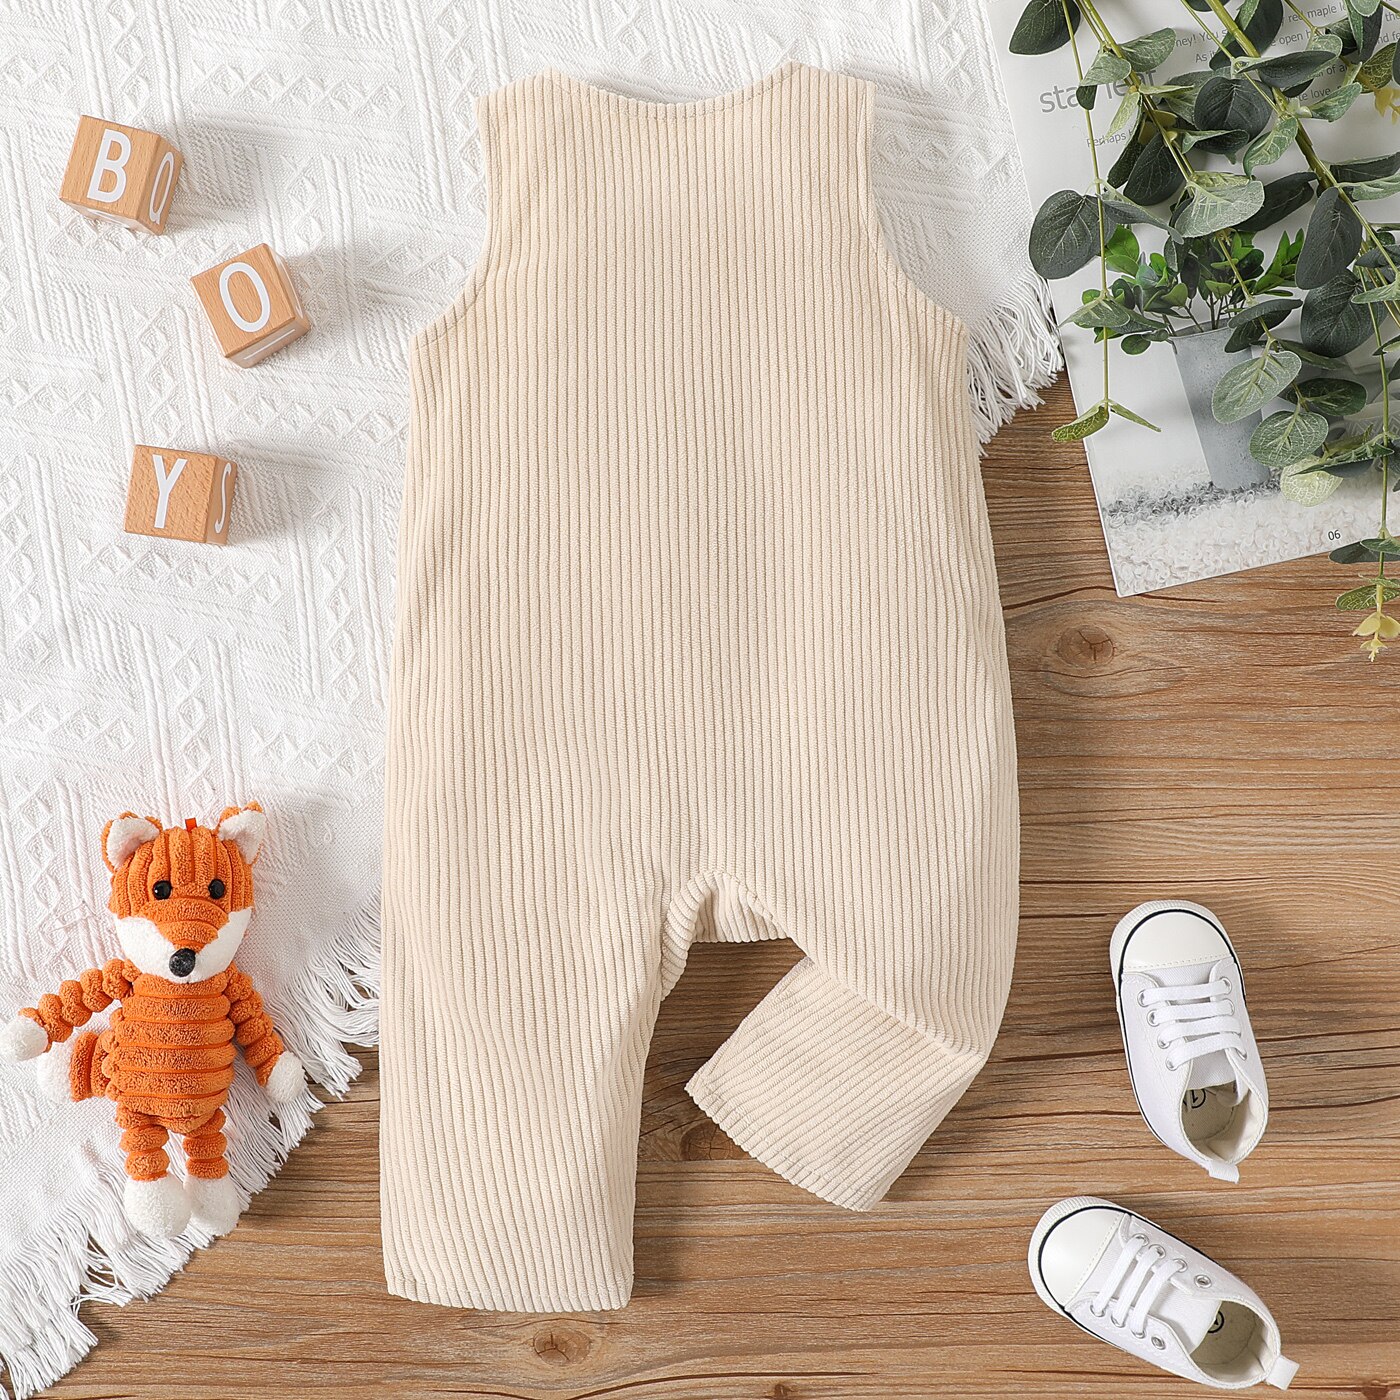 PatPat-Newborn-Baby-Boy-Clothes-New-Born-Babies-Costume-Overalls-Jumpsuits-Cartoon-Fox-Embroidered-Corduroy-Rompers-2